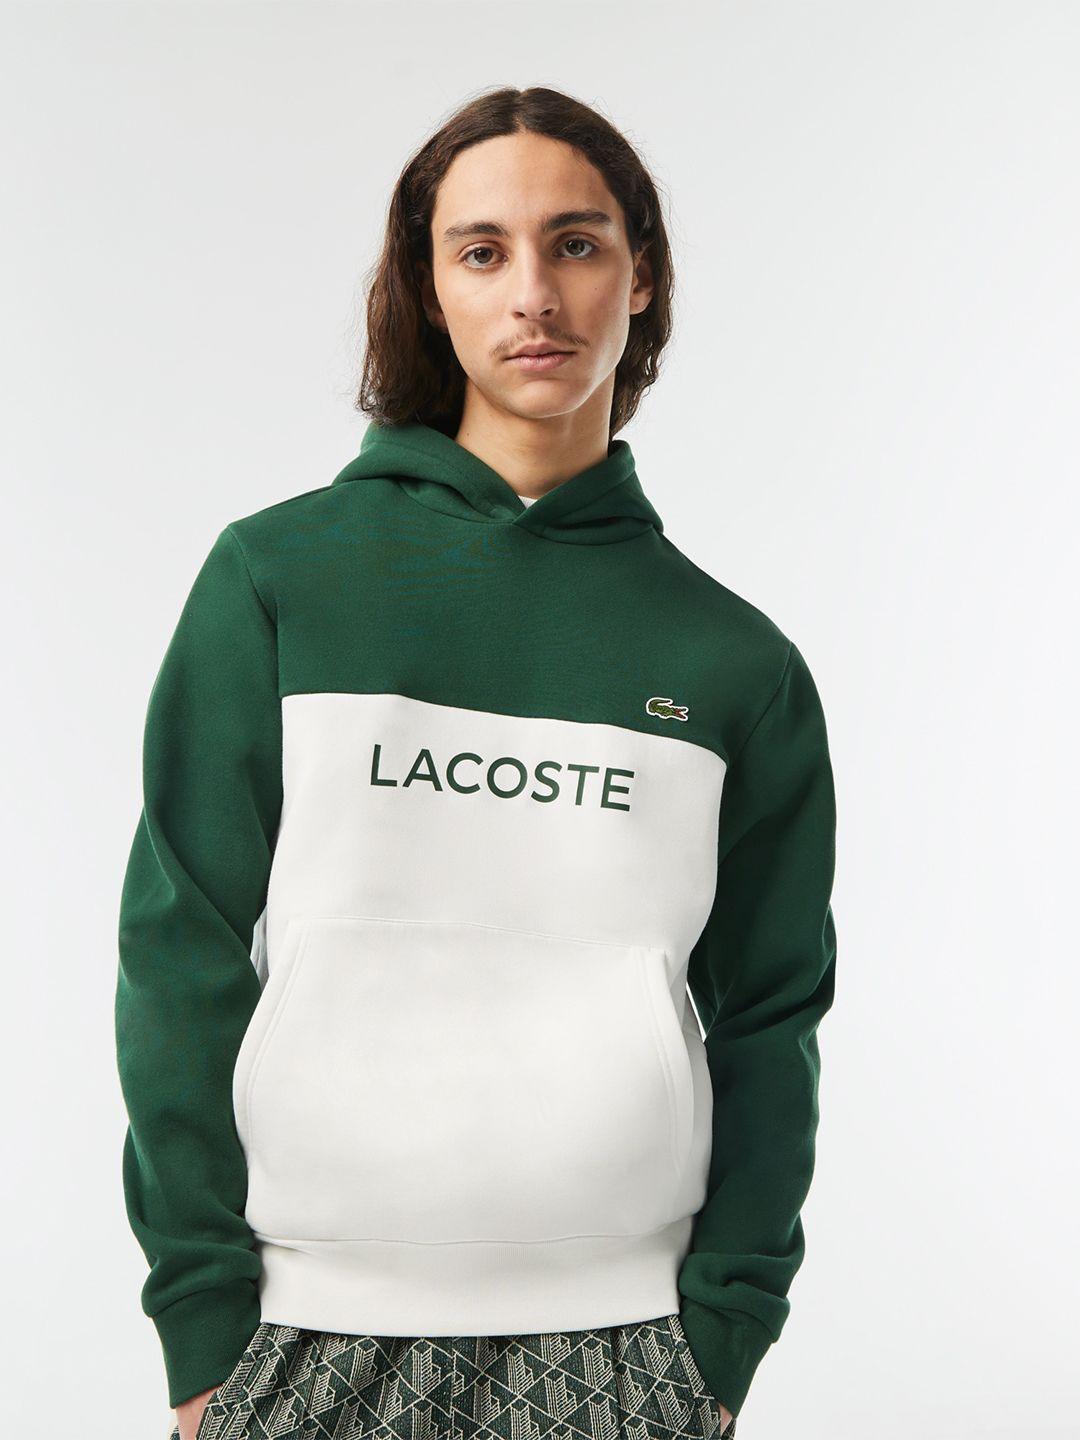 lacoste colourblocked knitted hooded pullover sweatshirt